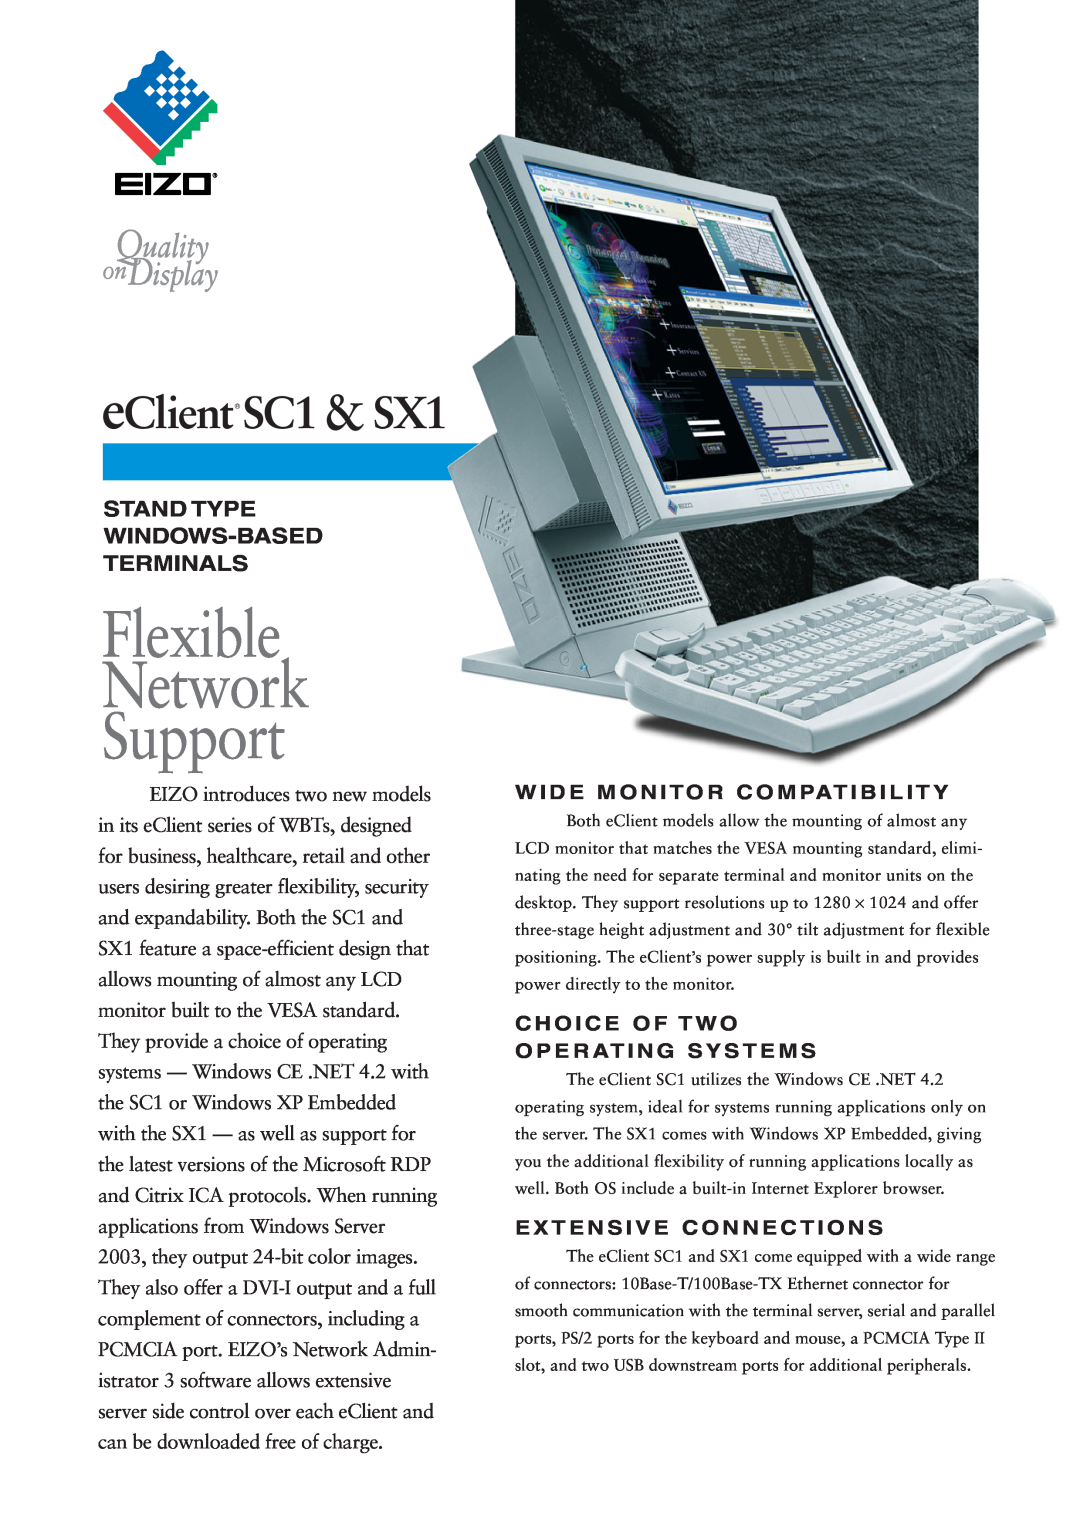 Eizo SC1, SX1 manual Stand Type Windows-Based Terminals, Flexible Network Support, Wide Monitor Compatibility 